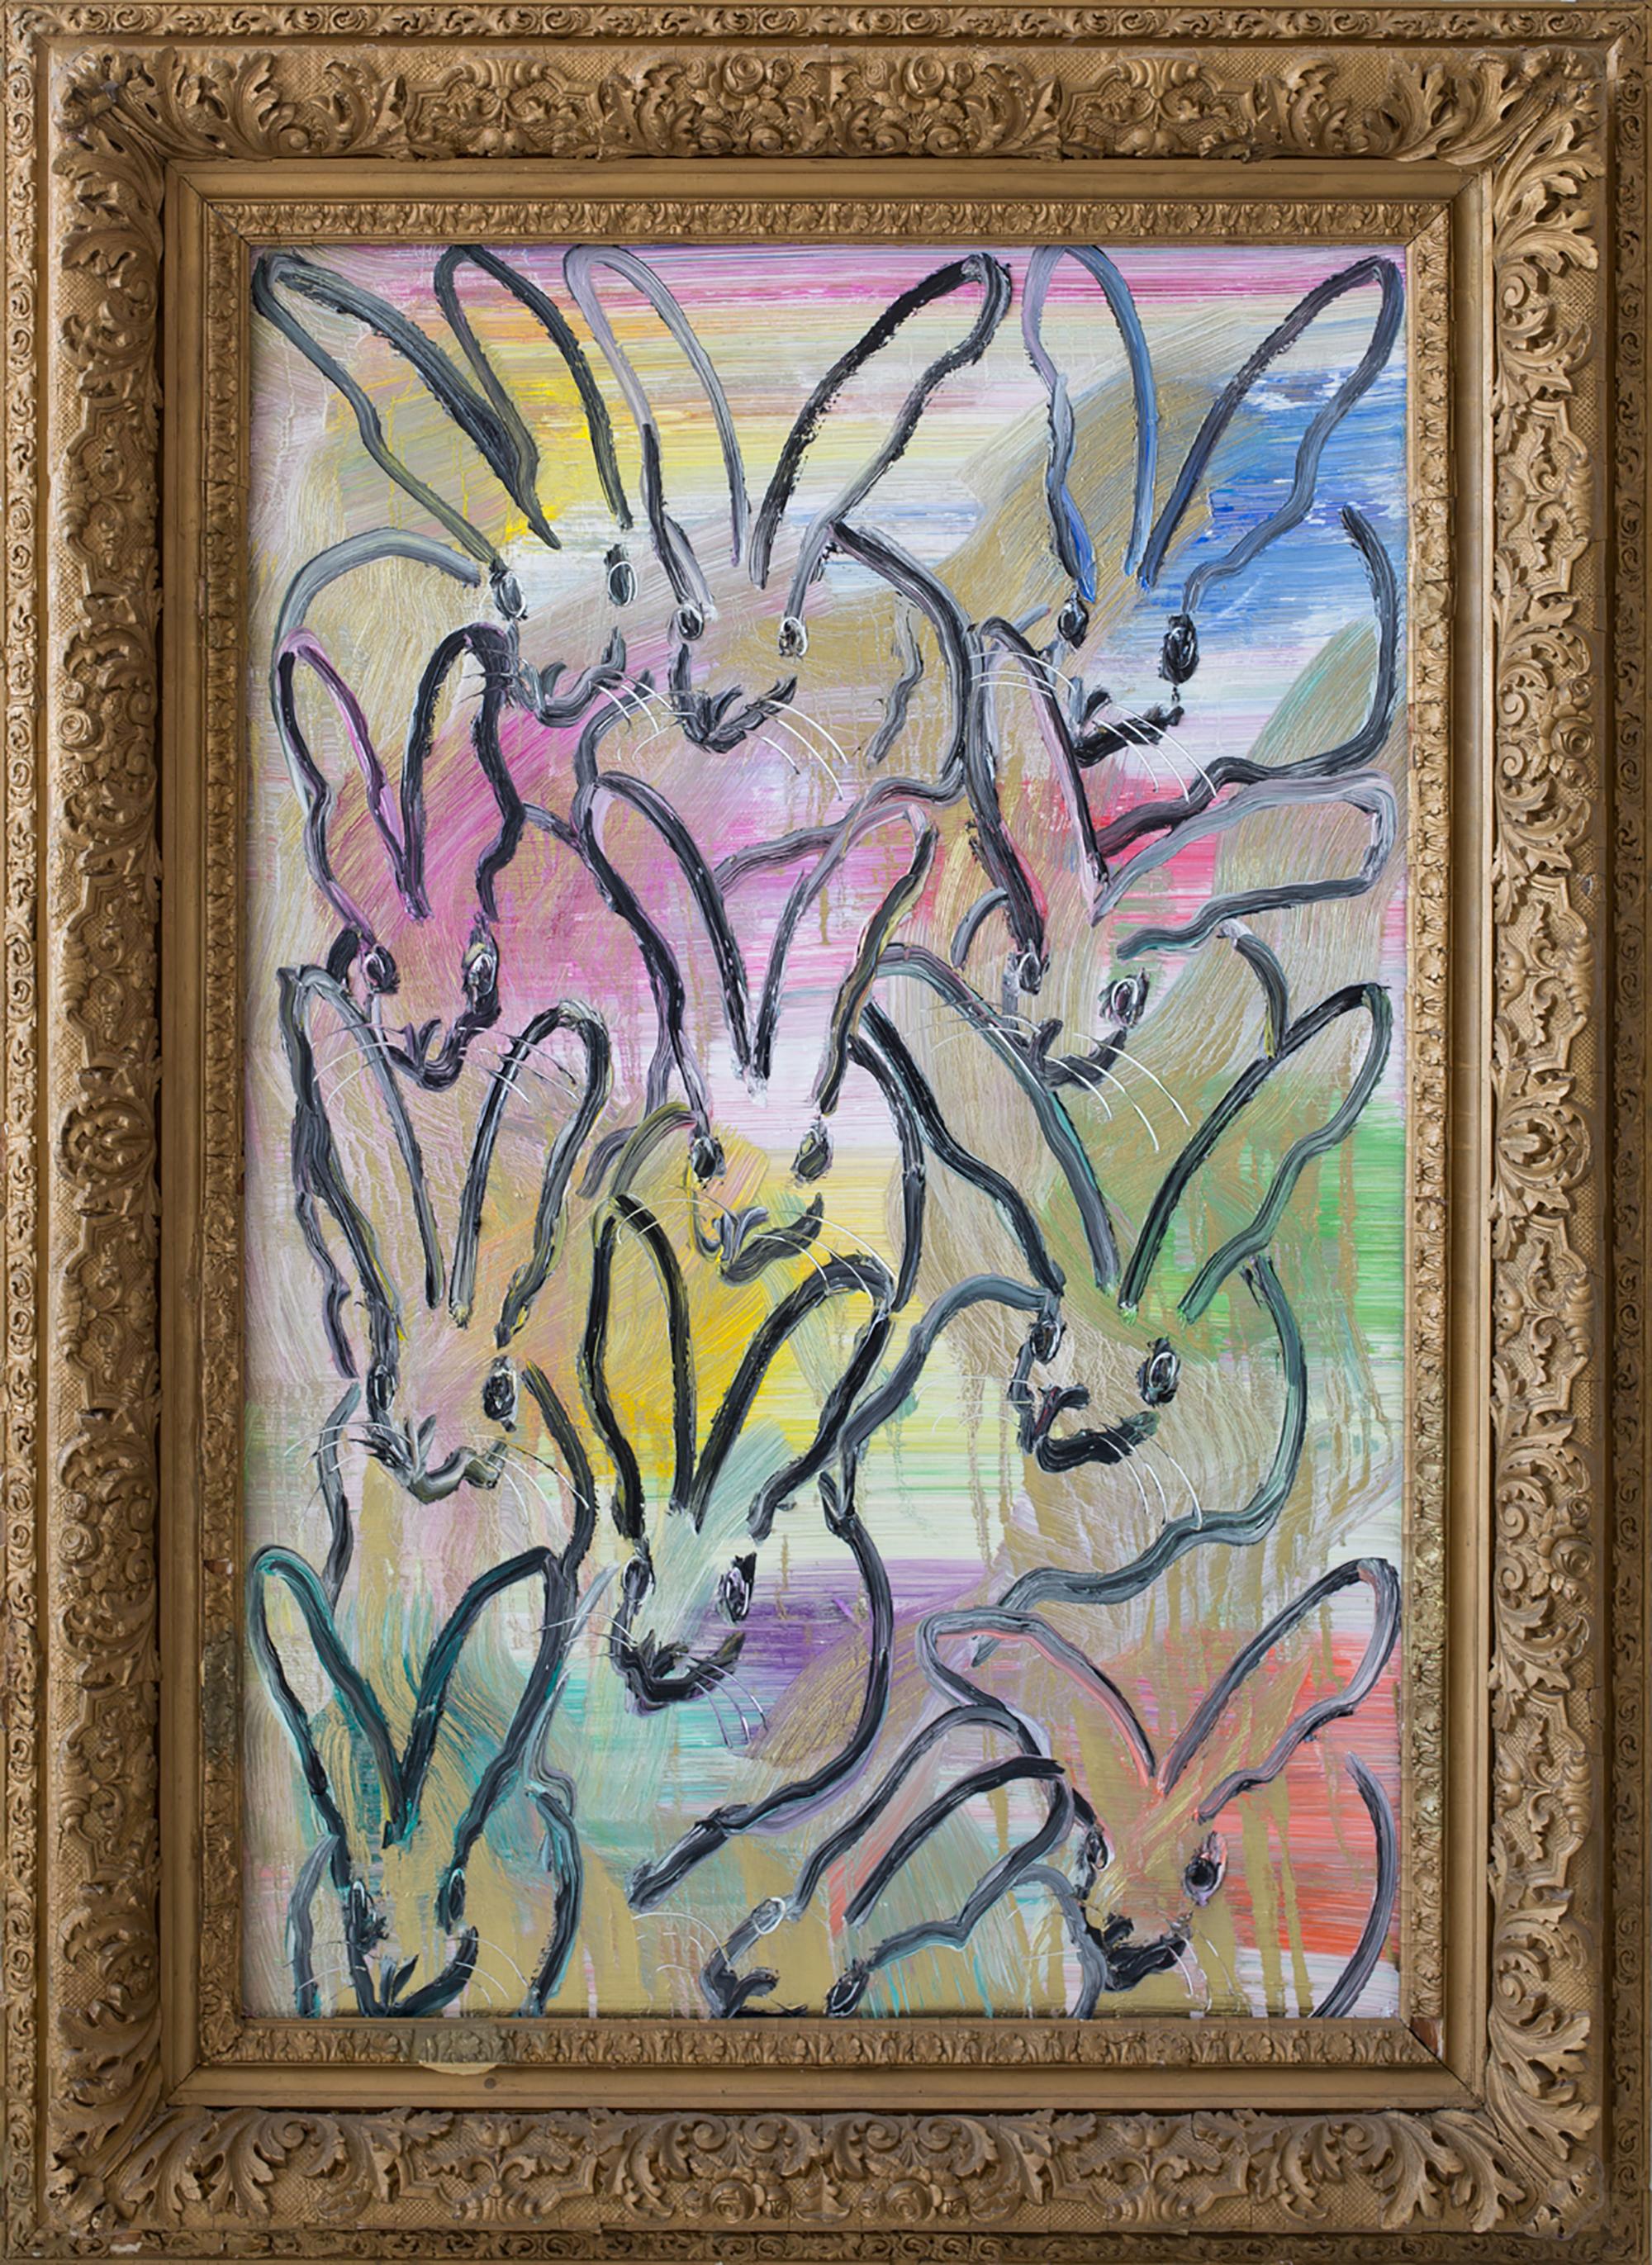 "Chinesis" by Hunt Slonem is a neo-expressionist style painting with multiple bunnies with splashes of pink, purple, yellow, green, blue and a wash of gold. This piece measures 33.5 inches wide by 51.5 inches tall.

Inspired by nature and his 60 pet